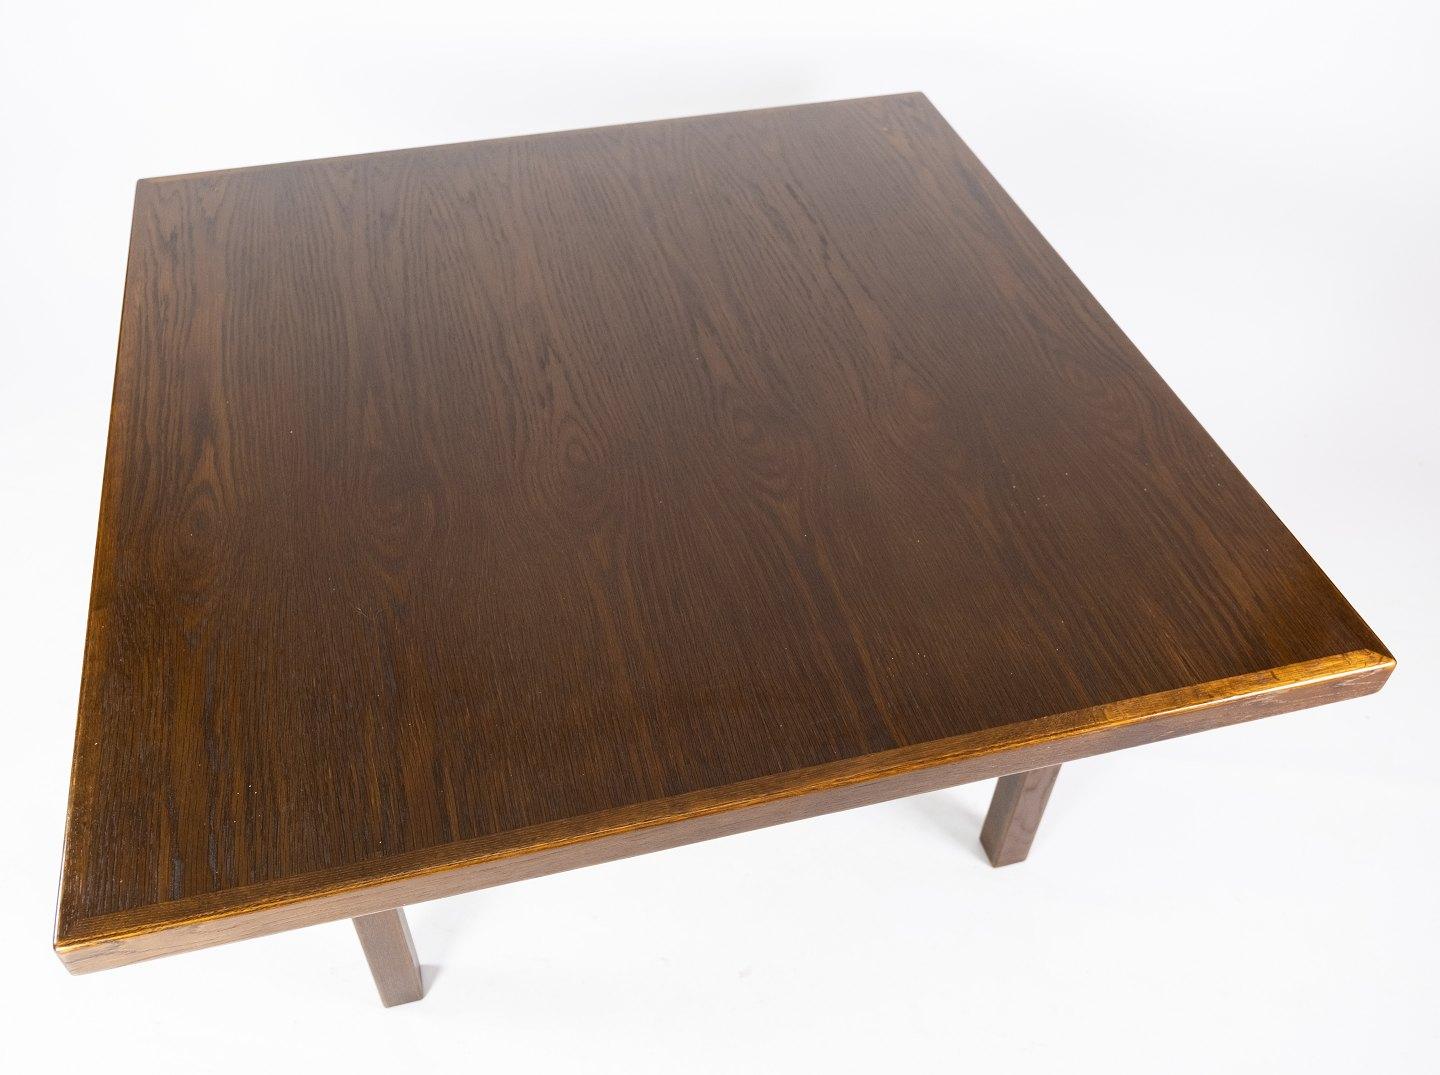 Coffee Table Made In Dark Oak, Danish Design From 1960s In Good Condition For Sale In Lejre, DK